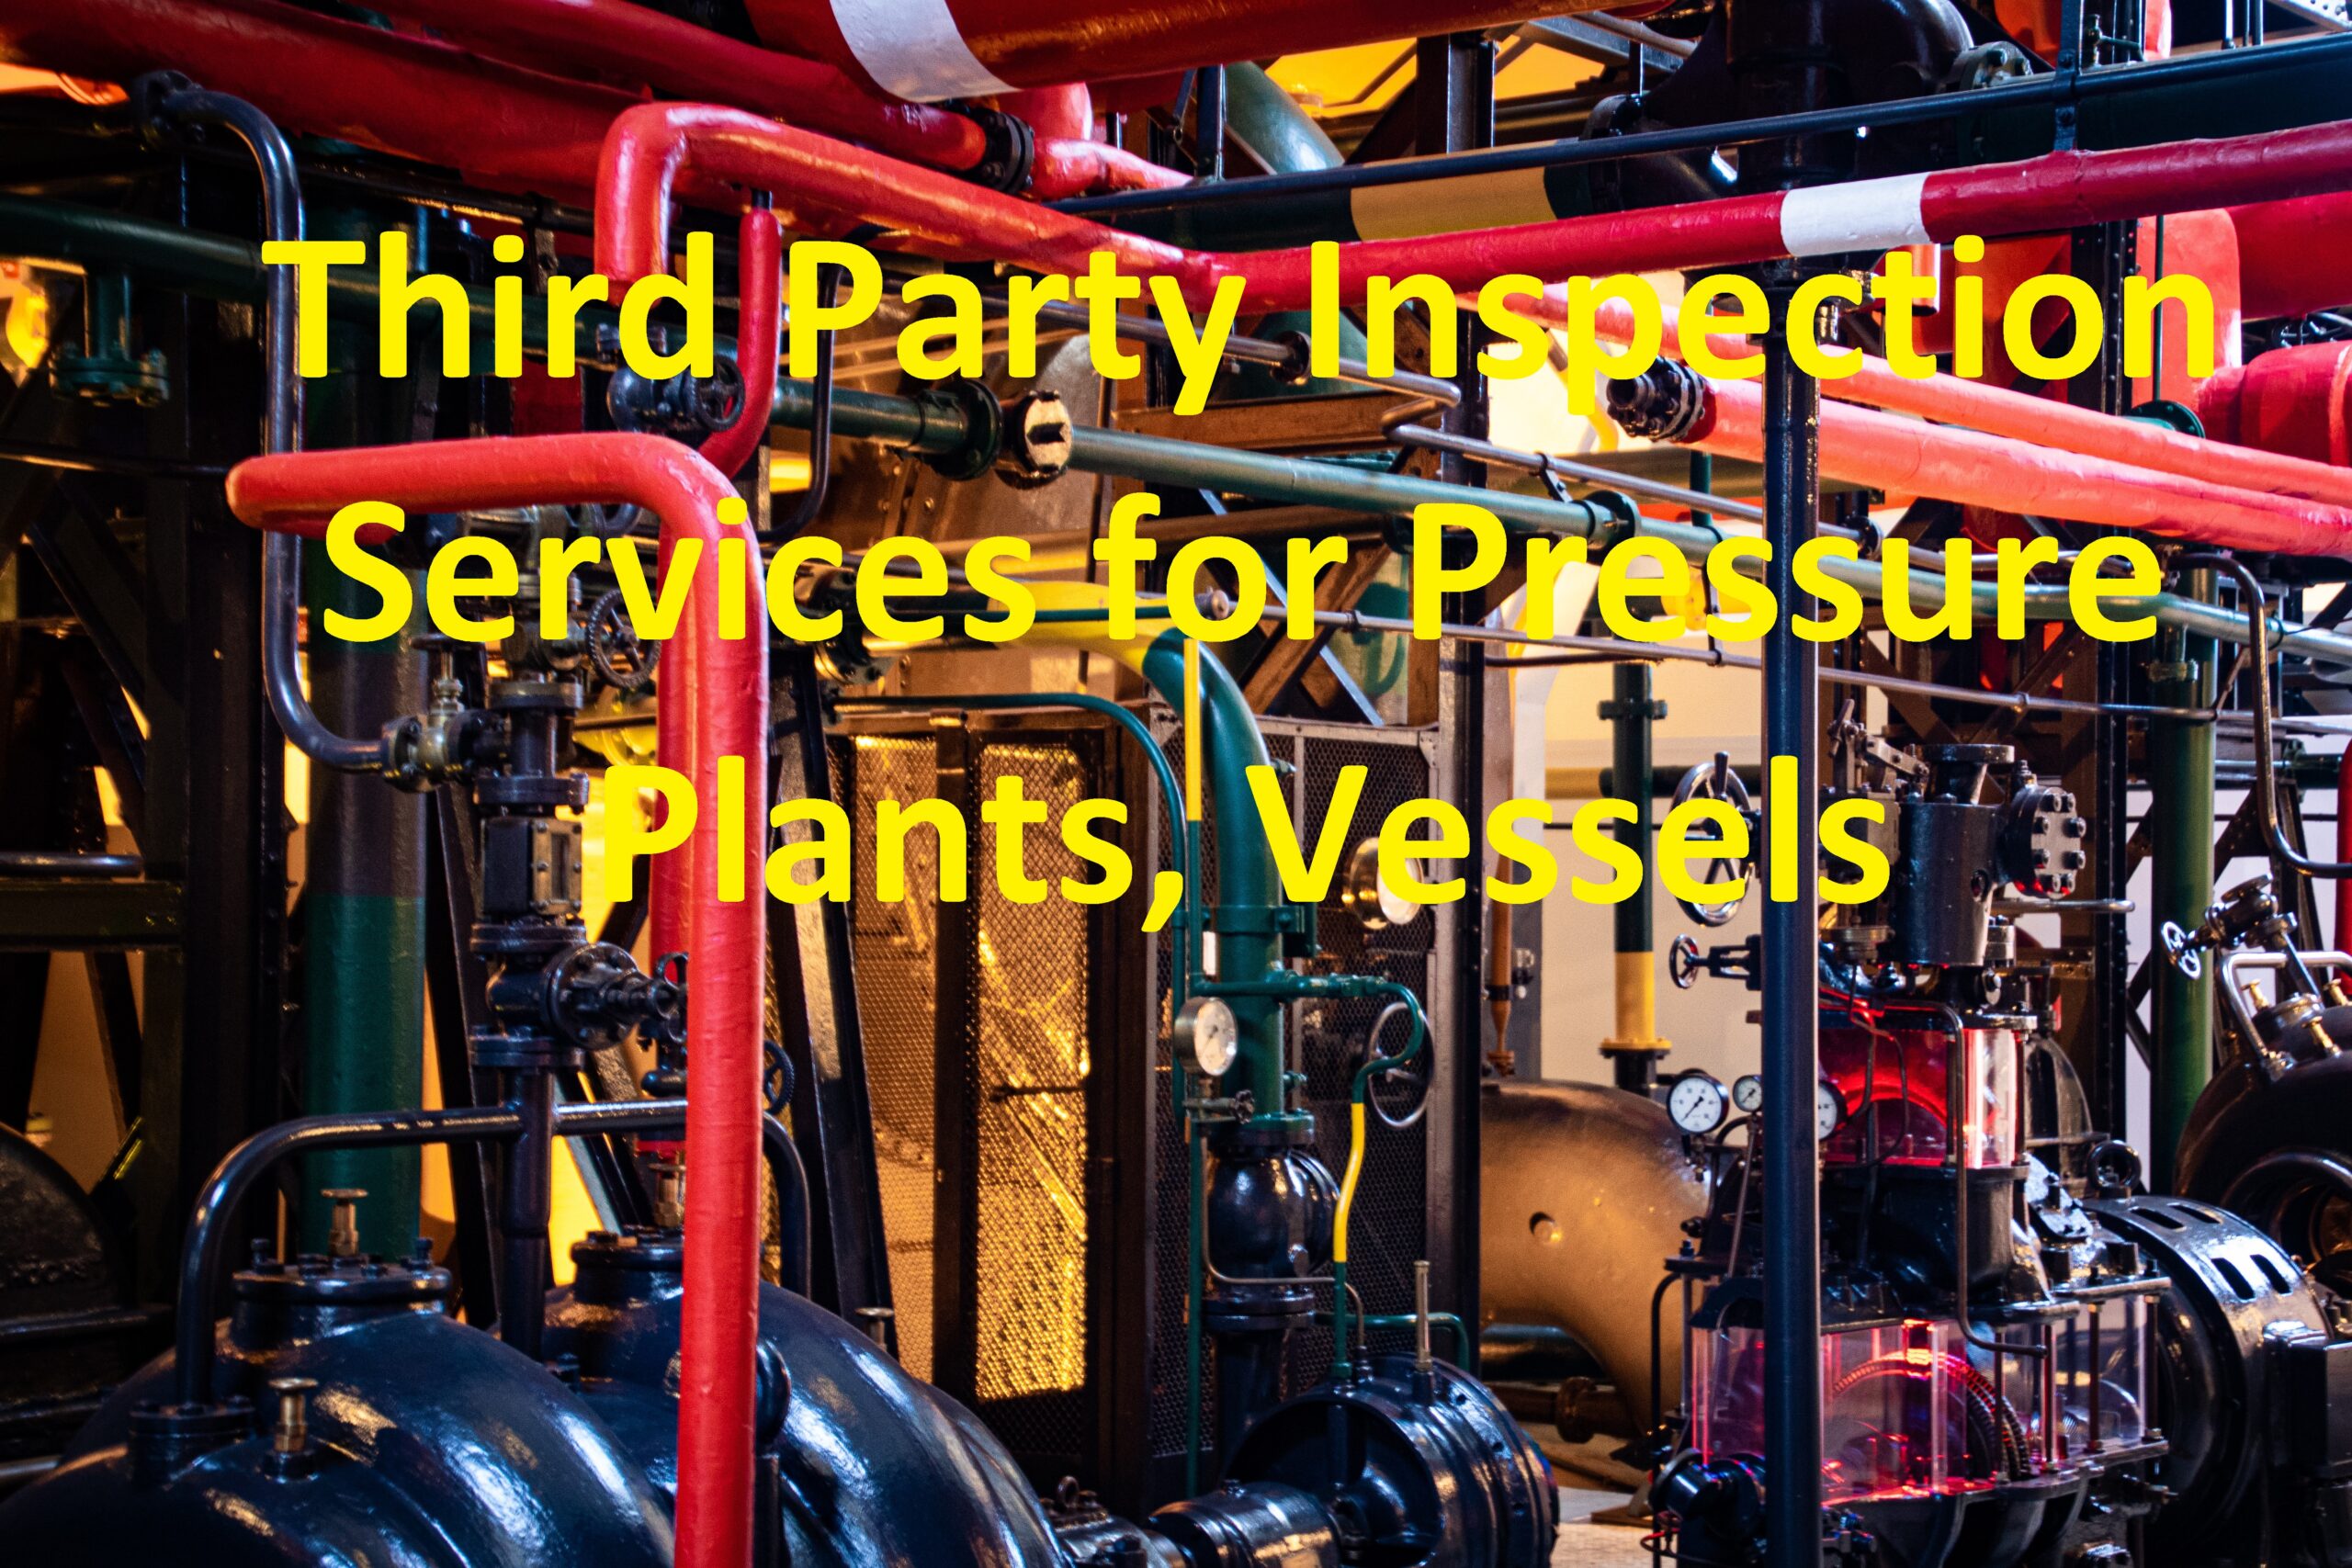 Third Party Inspection Services for Pressure Plants, Vessels